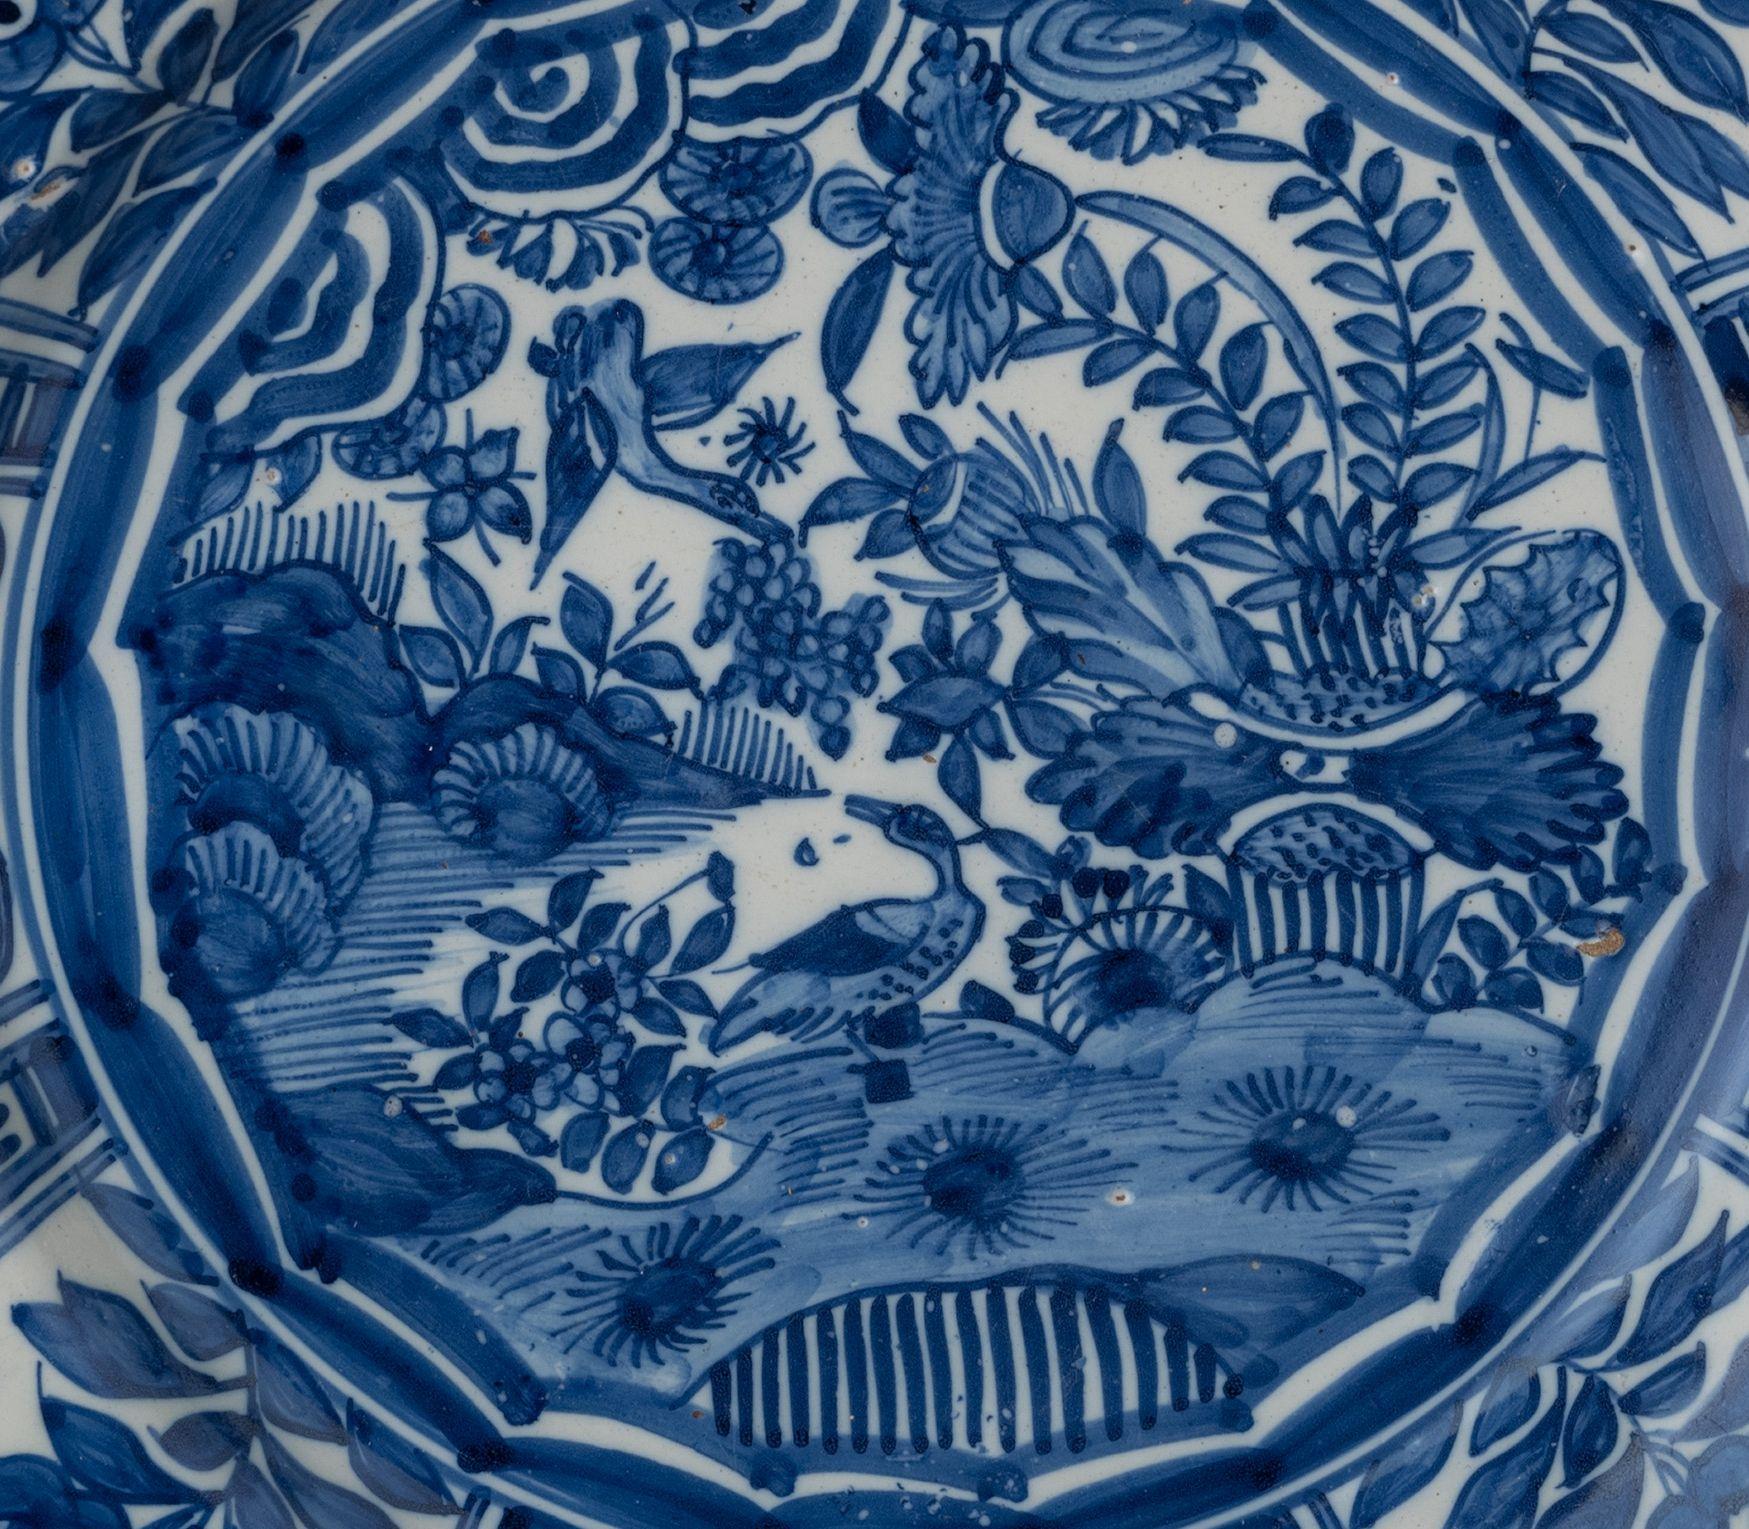 Large blue and white chinoiserie dish Delft, 1675-1685 Chinese-style landscape For Sale 3